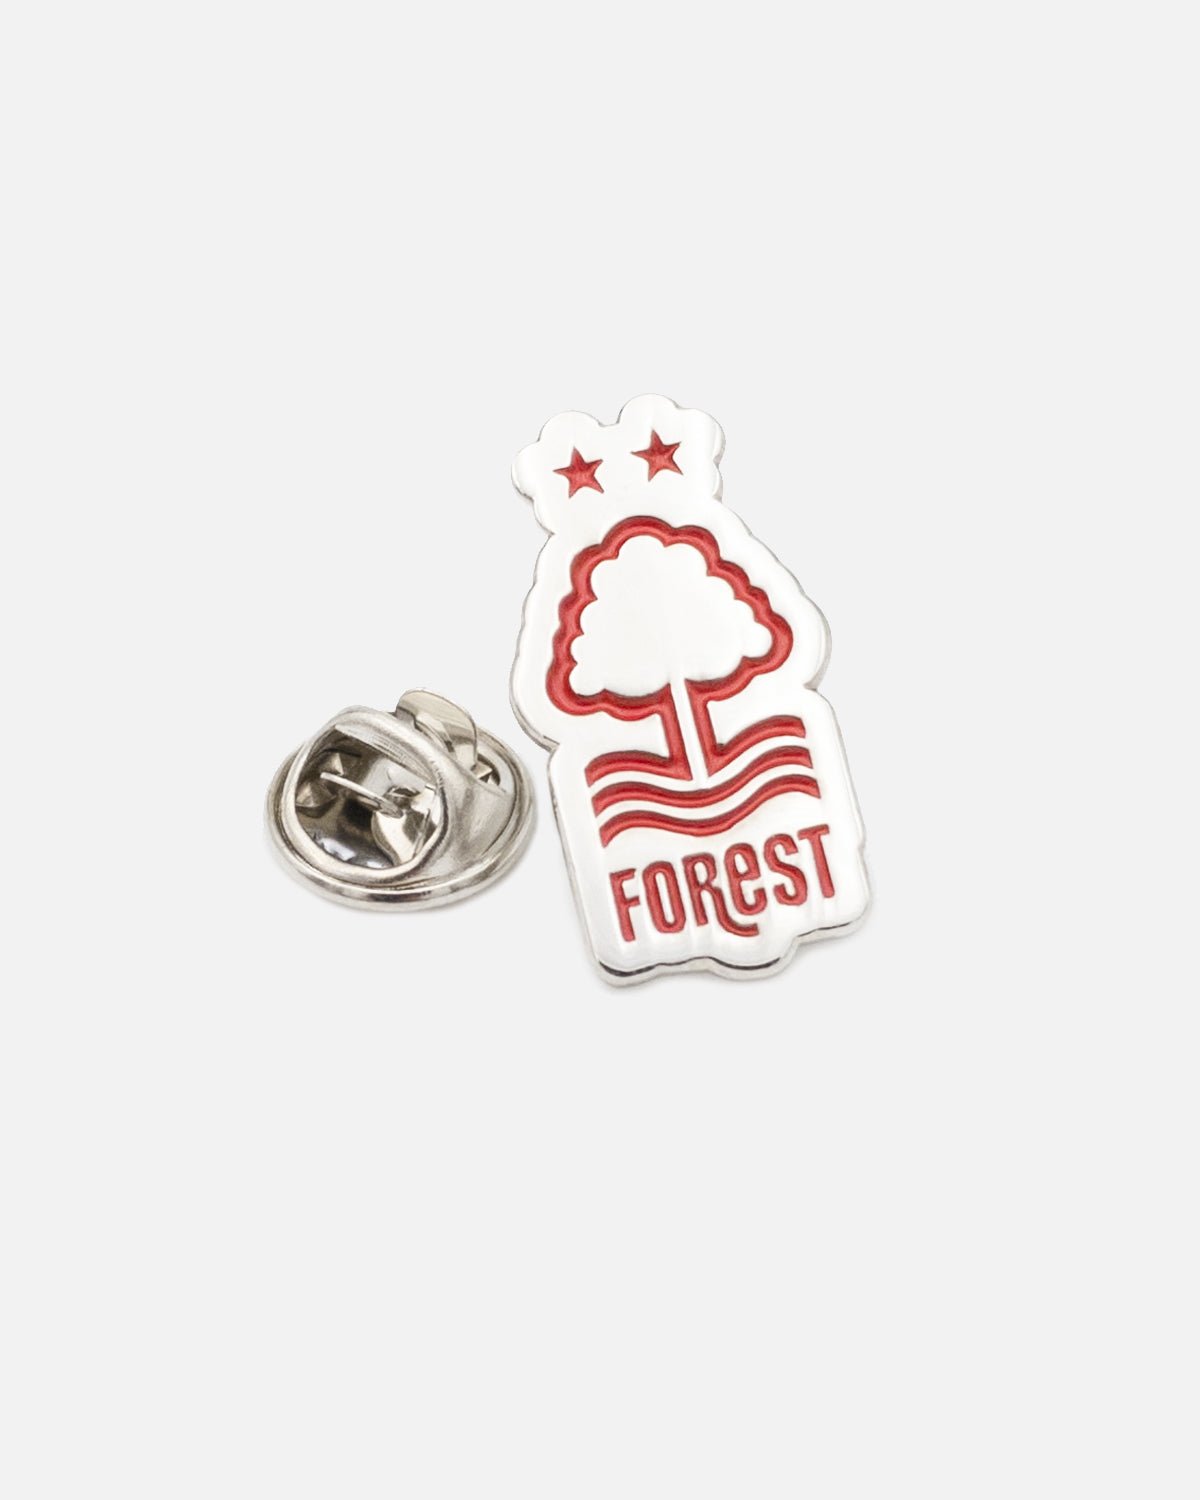 NFFC Red Crest Pin Badge - Nottingham Forest FC